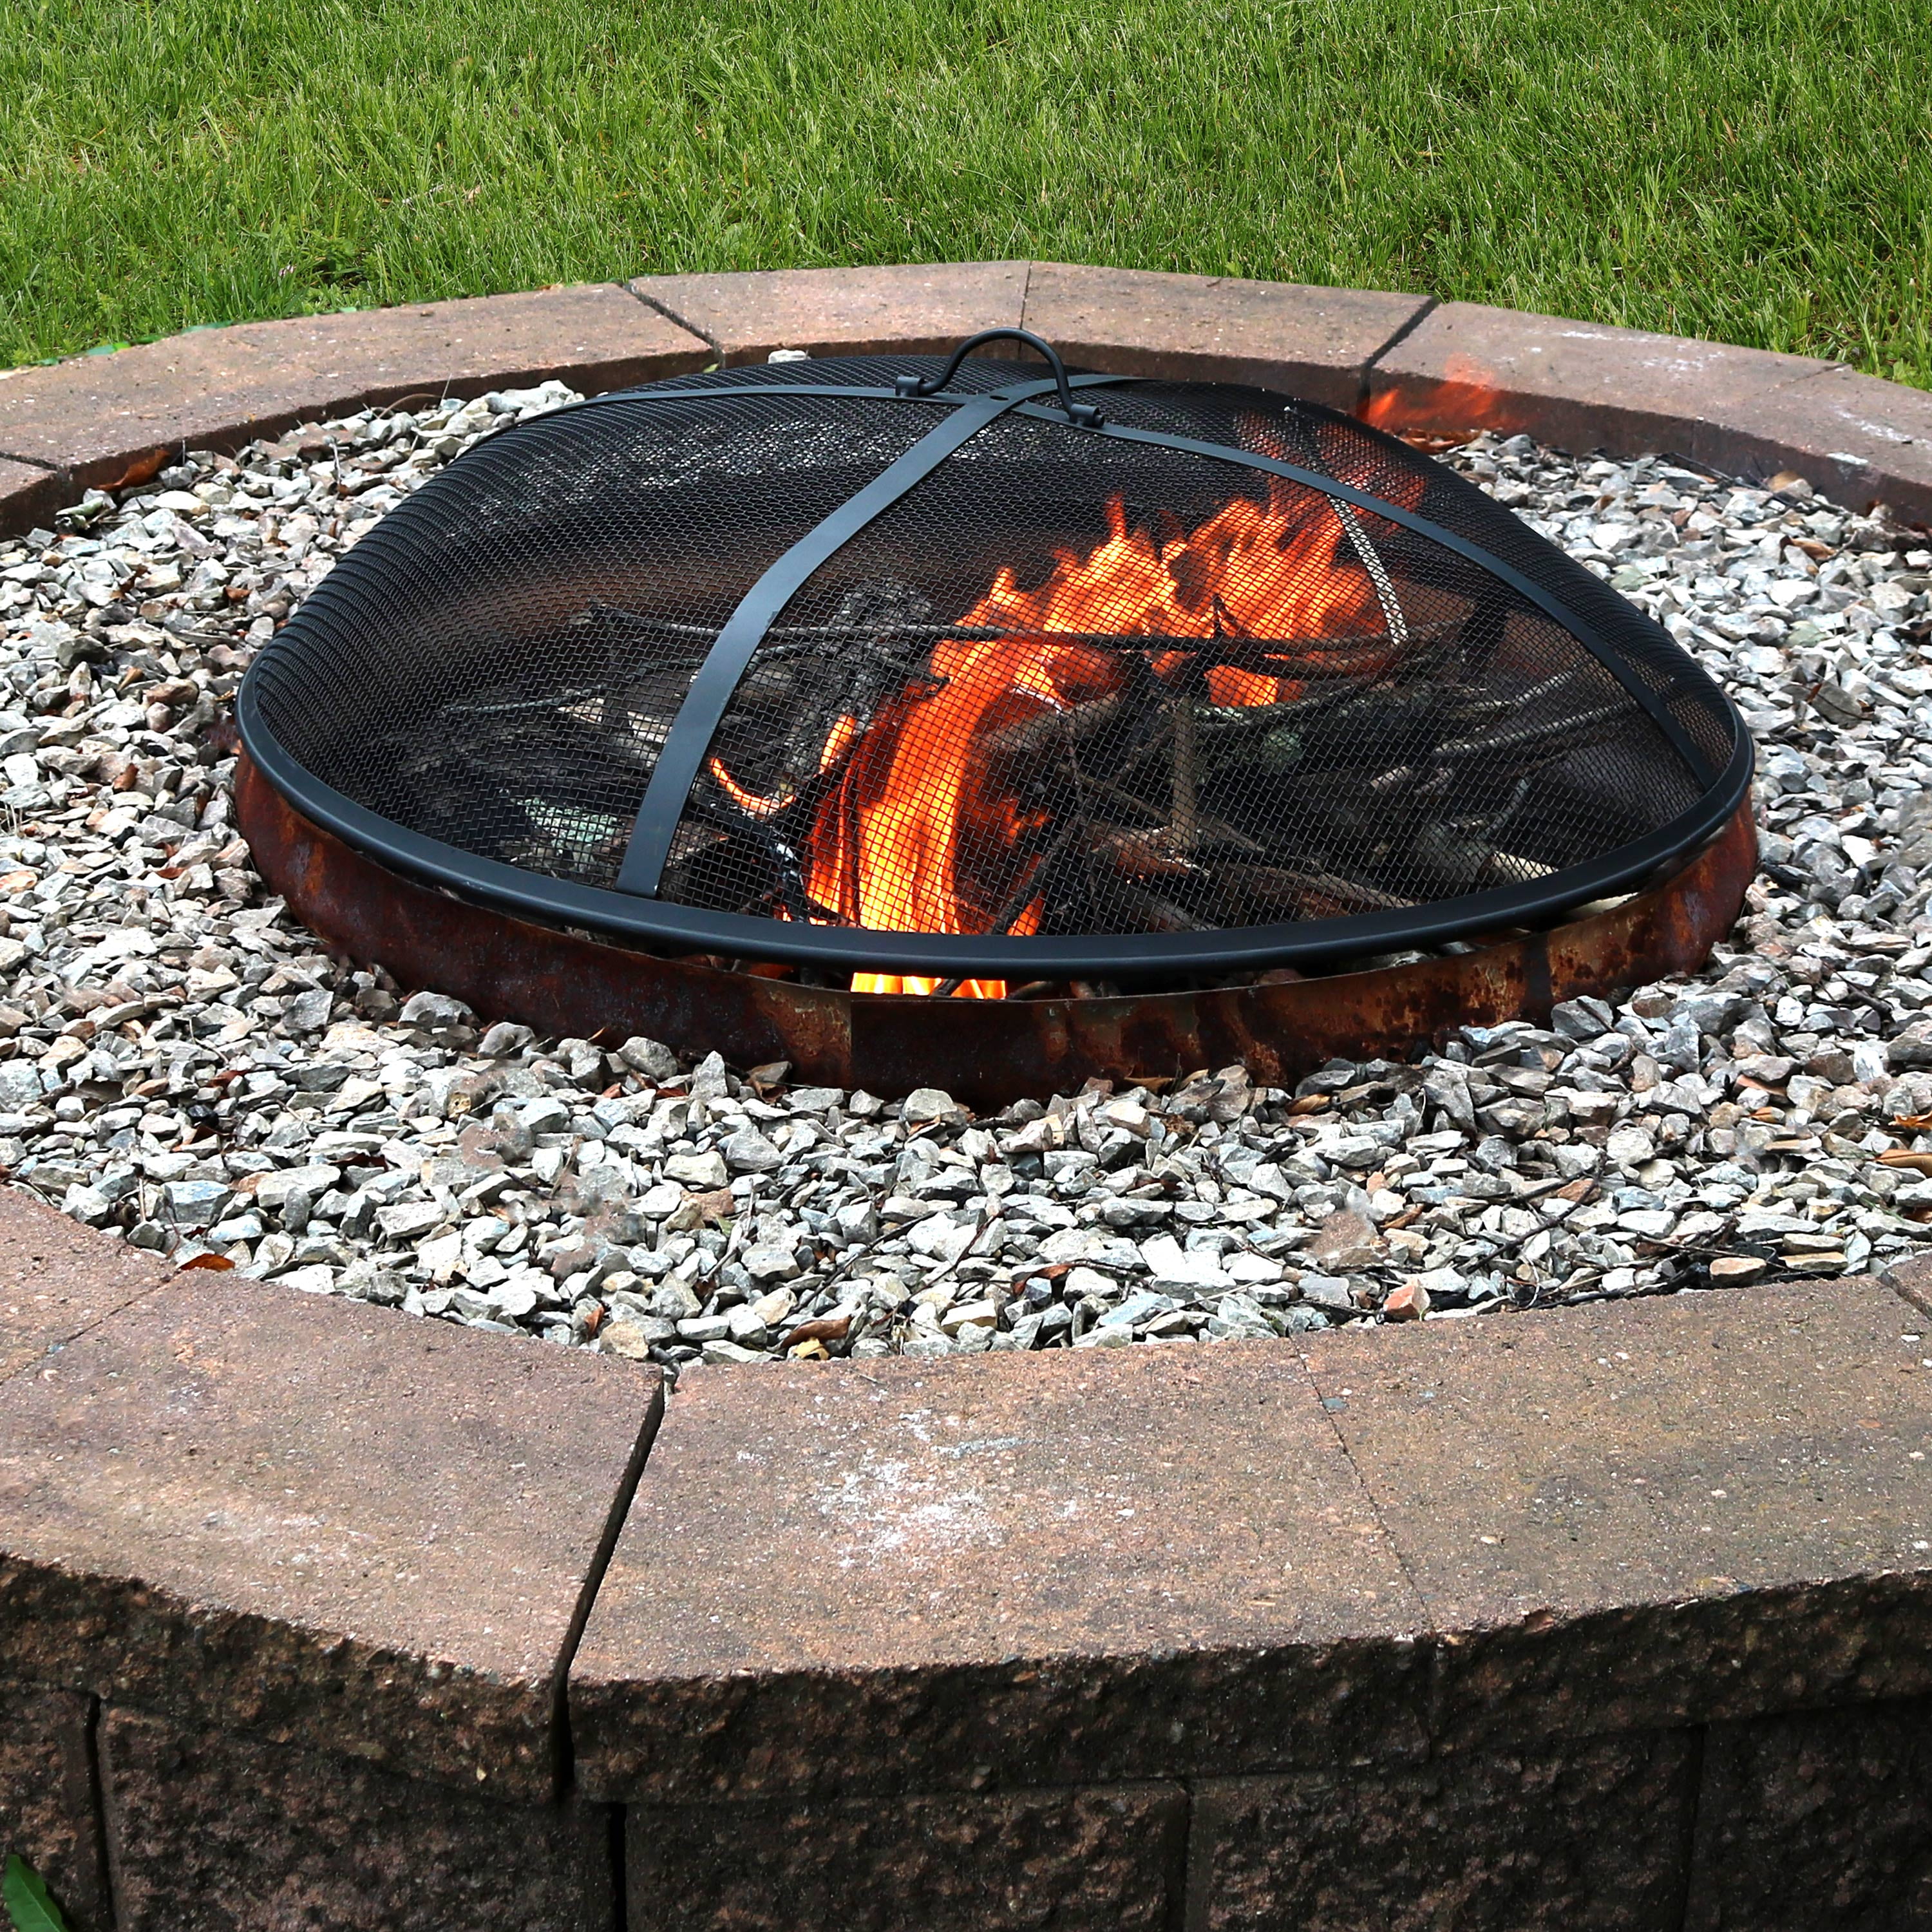 Sunnydaze Outdoor Fire Pit Spark Screen, Fire Pit Spark Screen Make Your Own